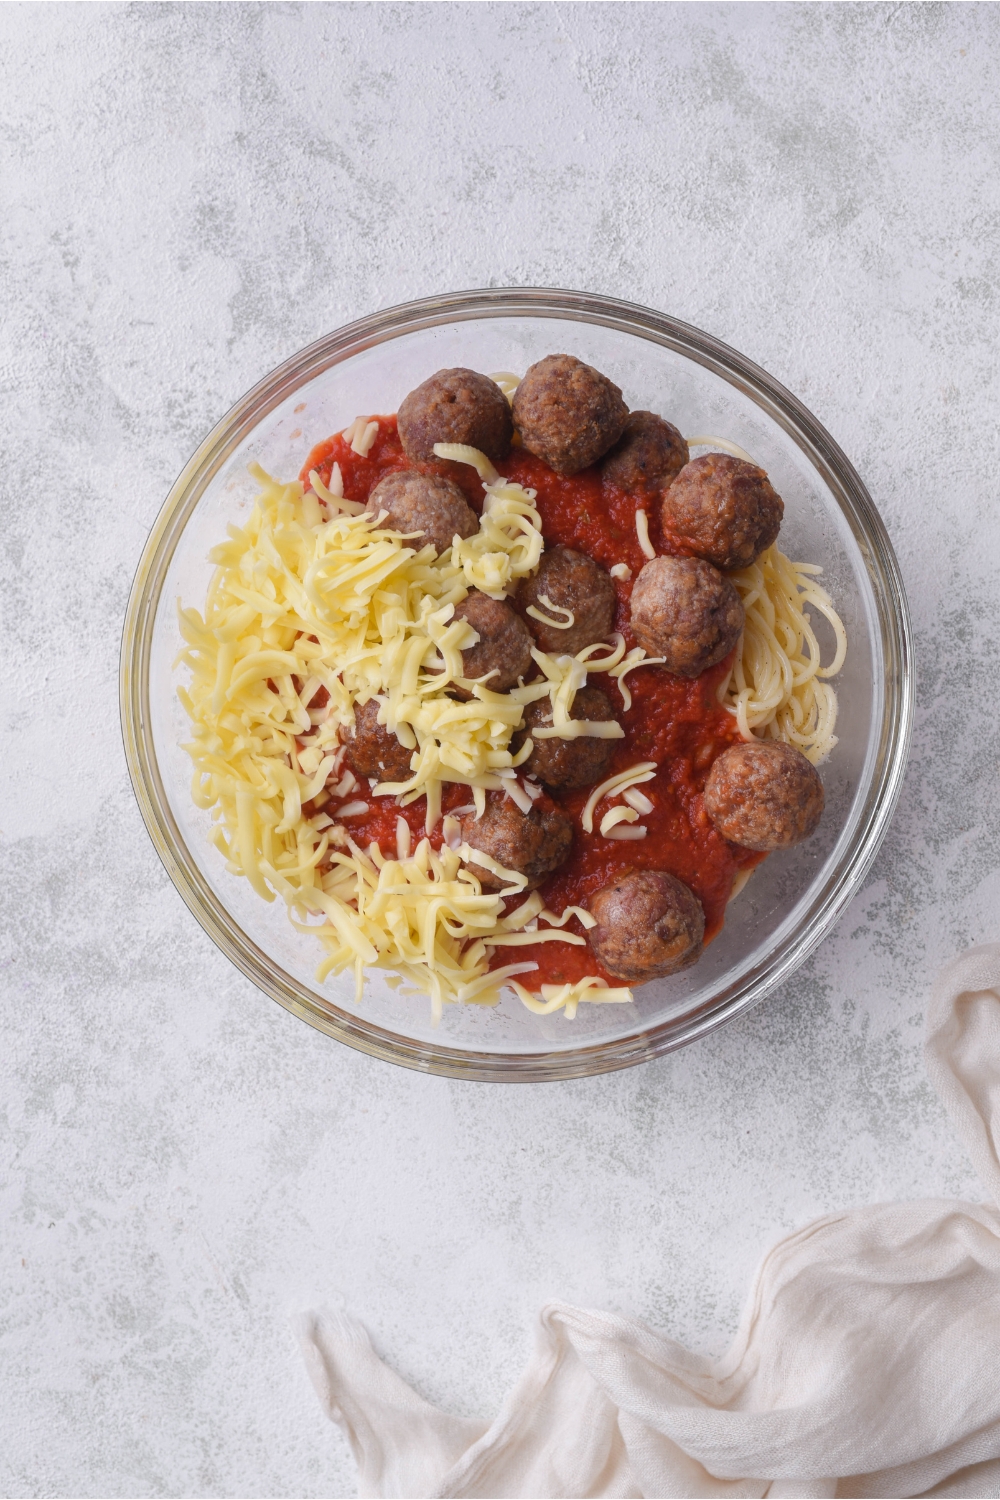 A bowl filled with spaghetti noodles, red sauce, meatballs, and shredded cheese.